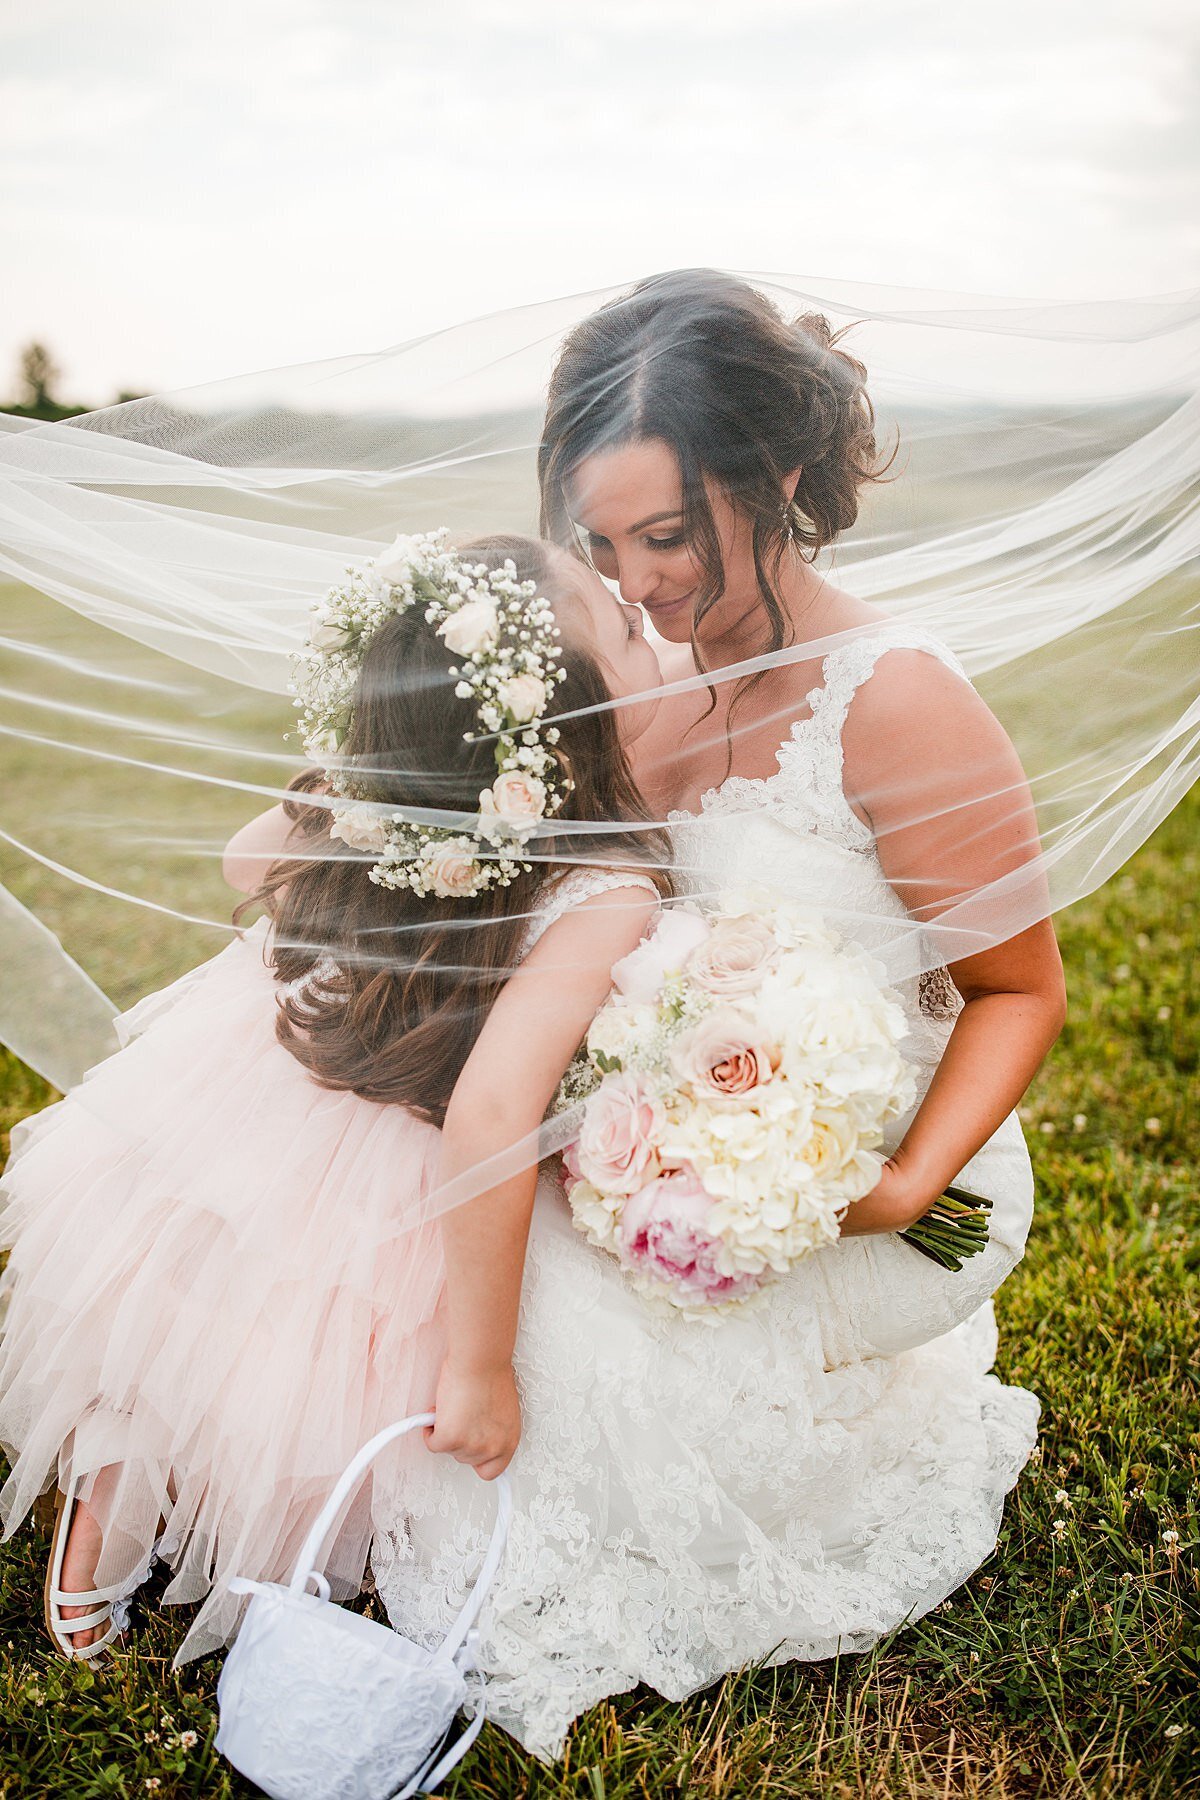 A bride and flower girl cuddle in a field underneath the bridal veil. The flower girl is wearing a very light pink ruffled dress with white sandals and a carnation and babys breath flower crown while holding a white satin basket of flower petals. The bride is wearing a white lace wedding dress and is holding a white round bouquet of hydrangea, white roses and blush pink roses at White Dove Barn for her Nashville Wedding.